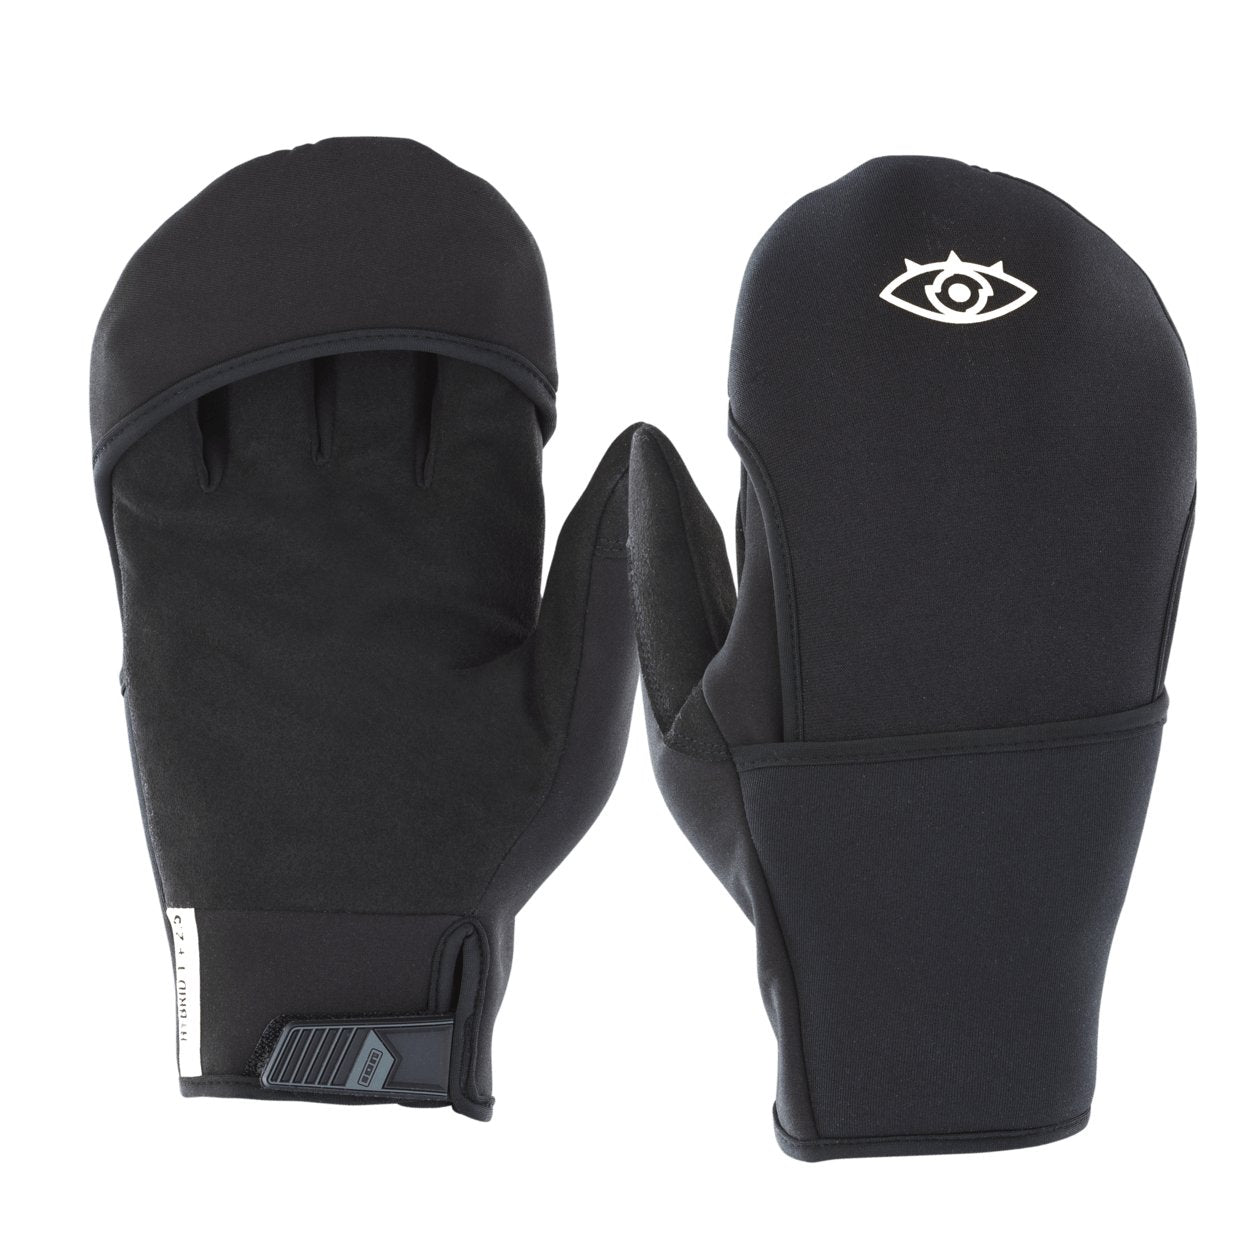 ION Hybrid Gloves 1+2.5 2023 - Worthing Watersports - 9010583138749 - Neo Accessories - ION Water